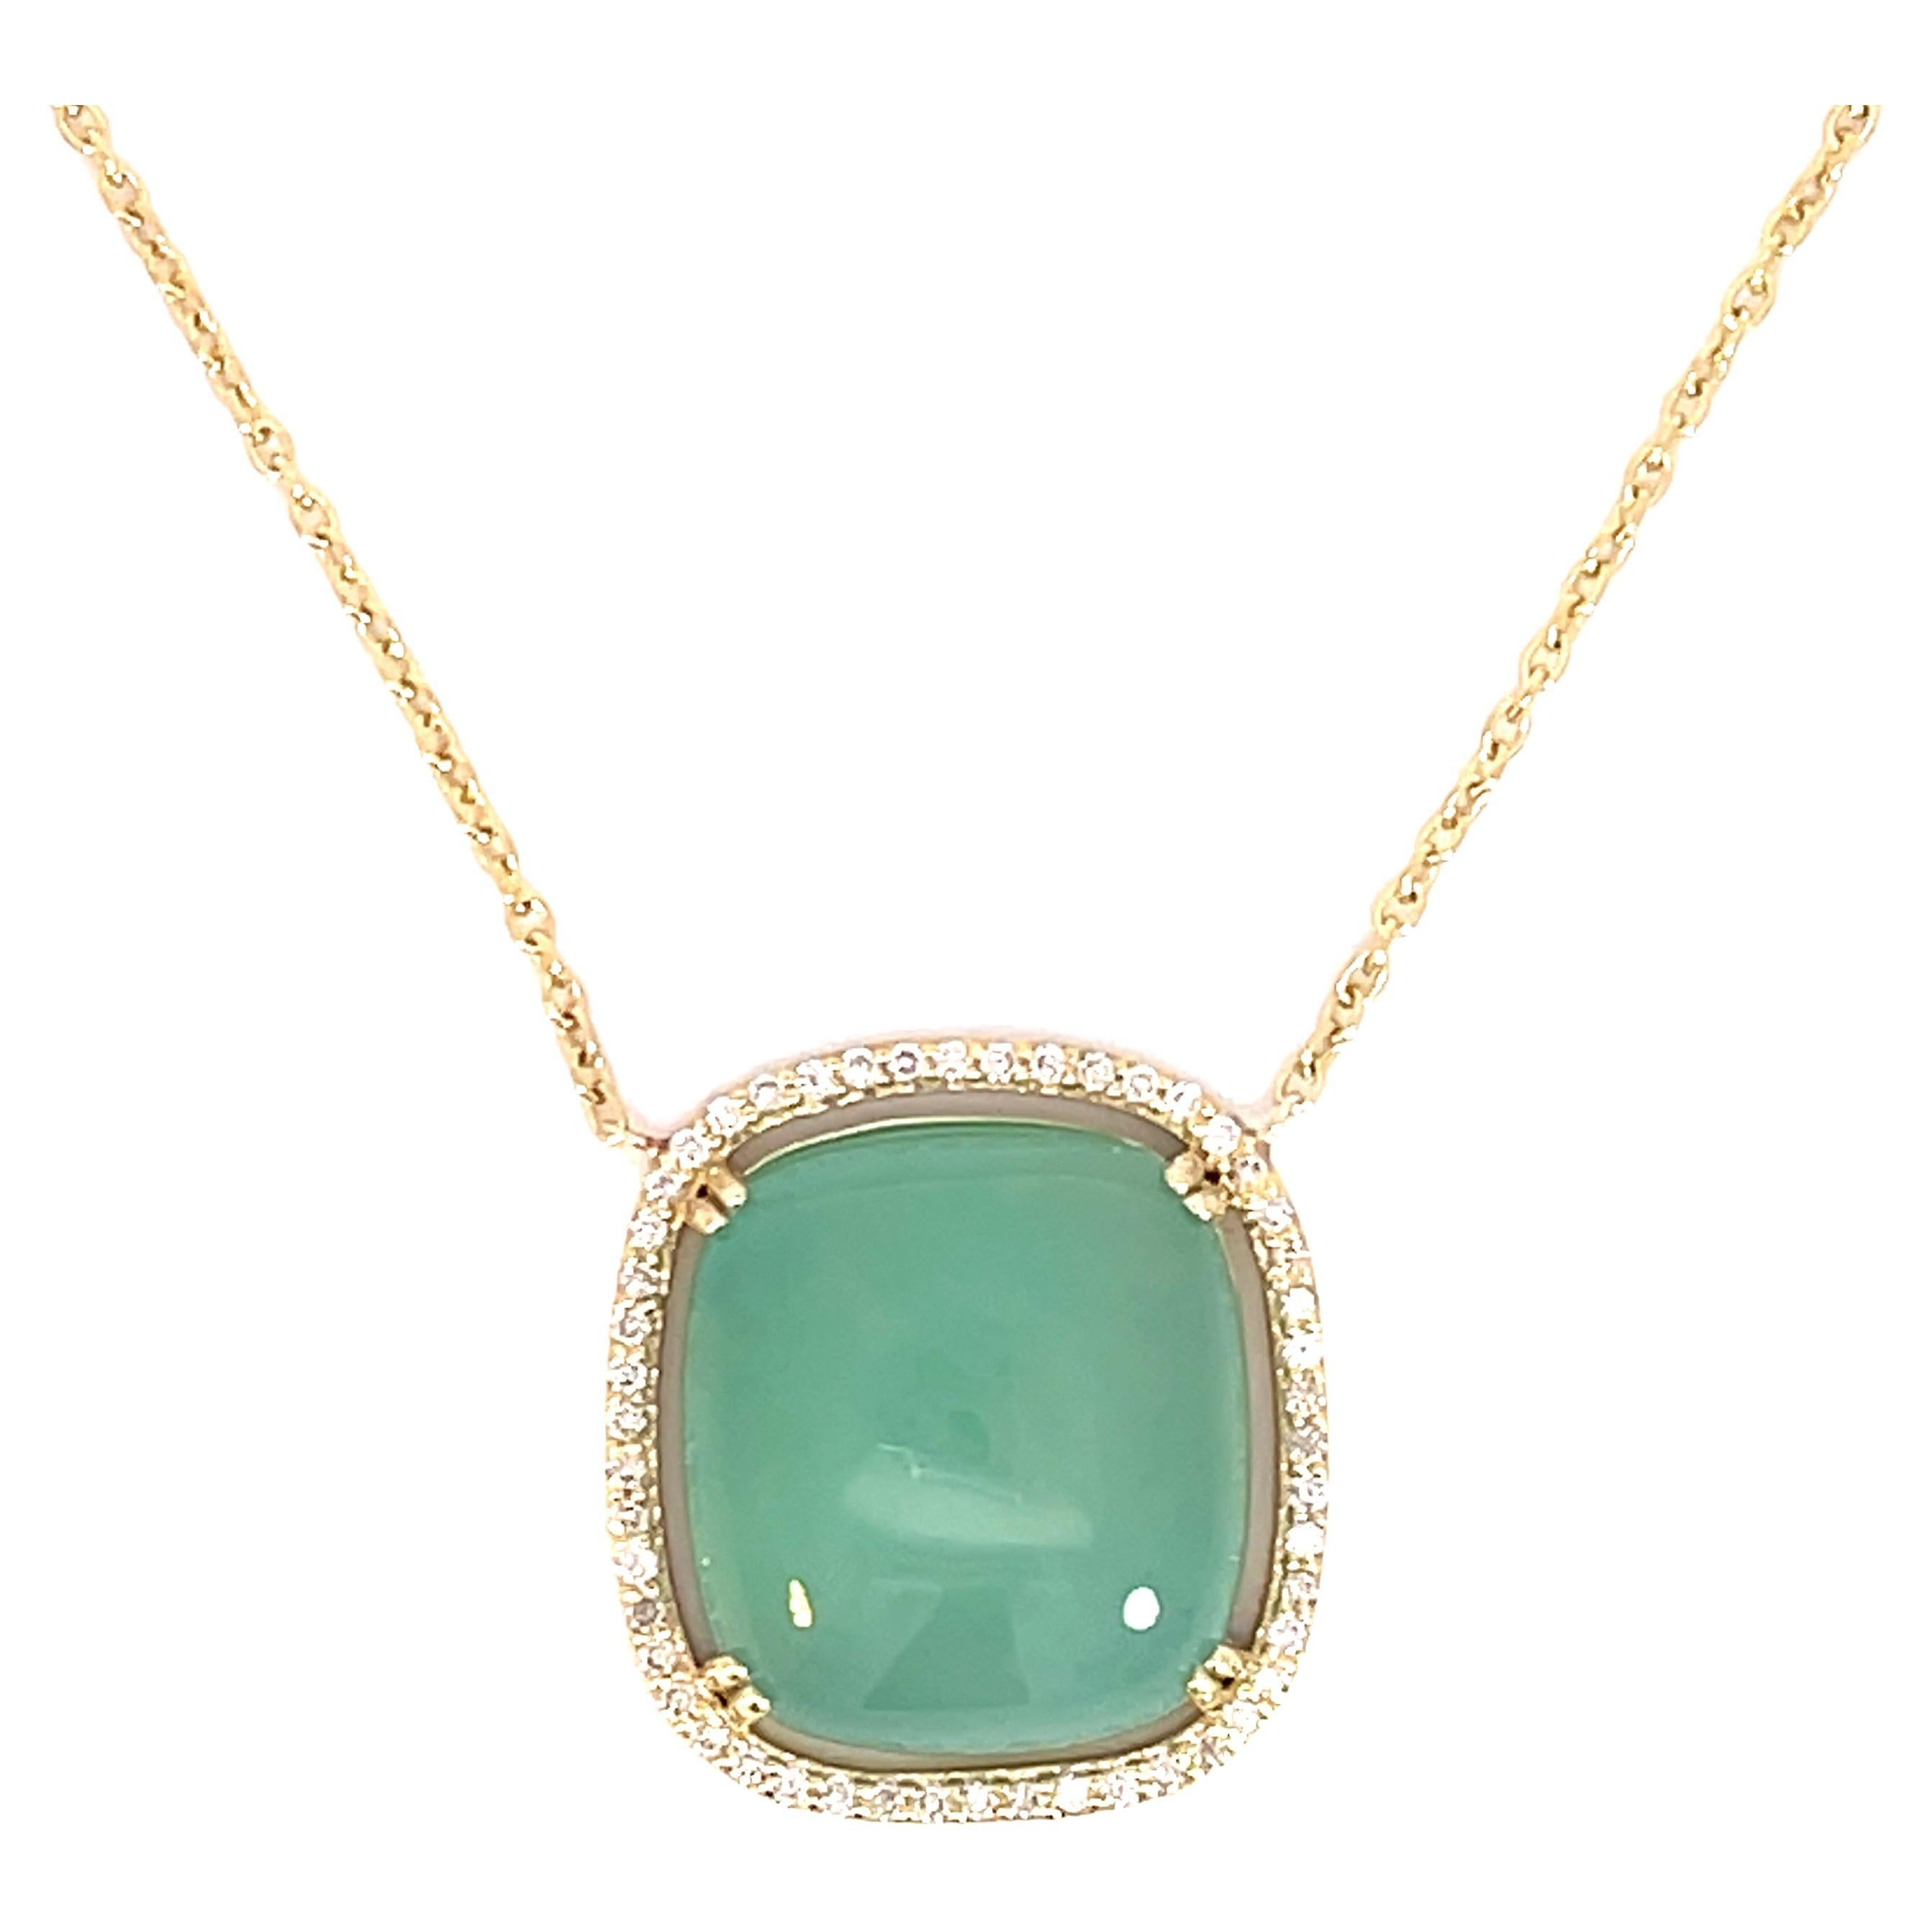 18k Yellow Gold Seafoam Chalcedony Necklace with a Champagne Diamond Halo